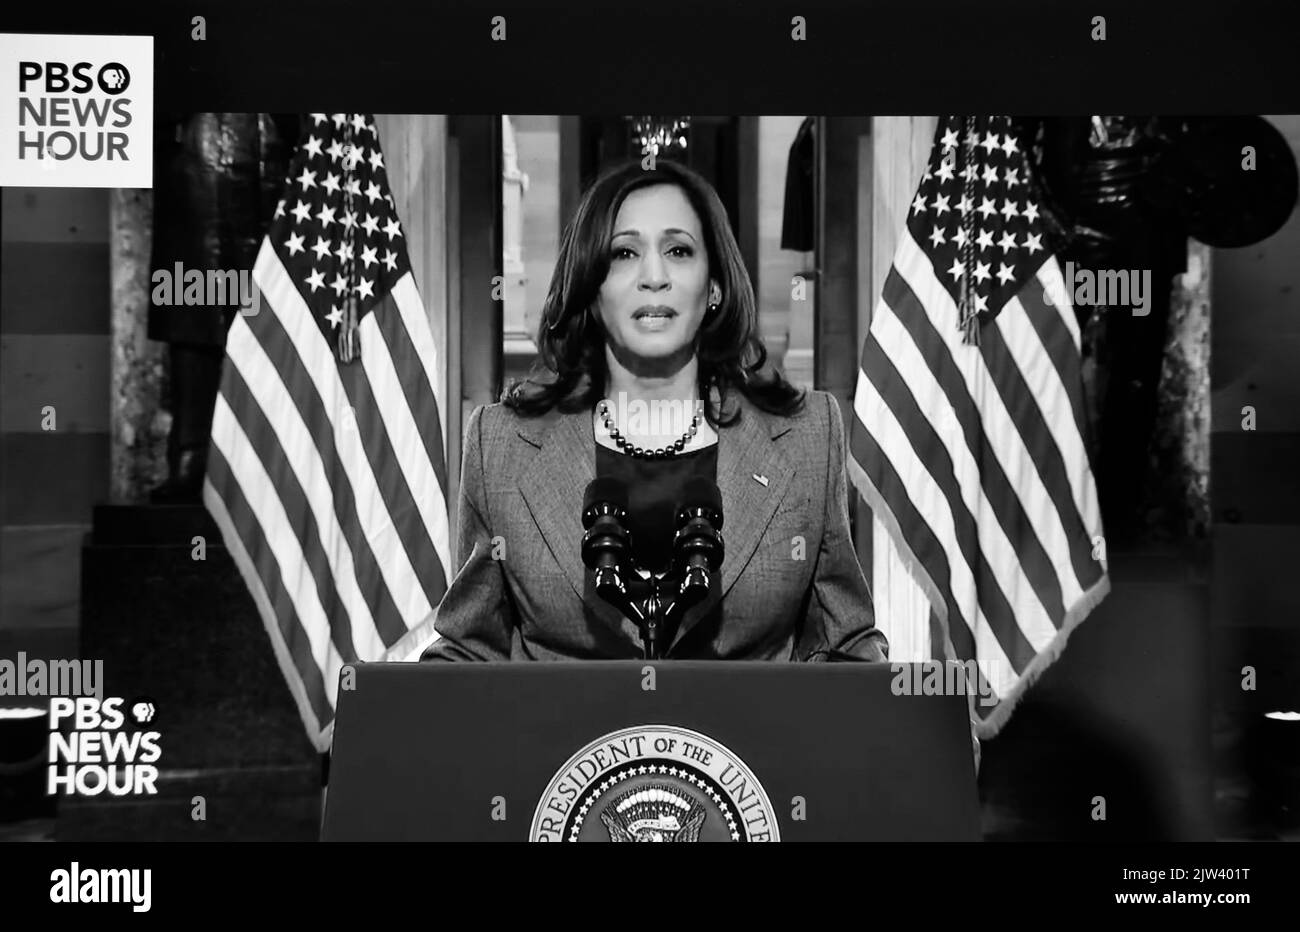 A PBS TV NewsHour screen shot of U.S. Vice President Kamala Harris speaking on the annivarsay of the January 6 attack on the U.S. Capitol. Stock Photo